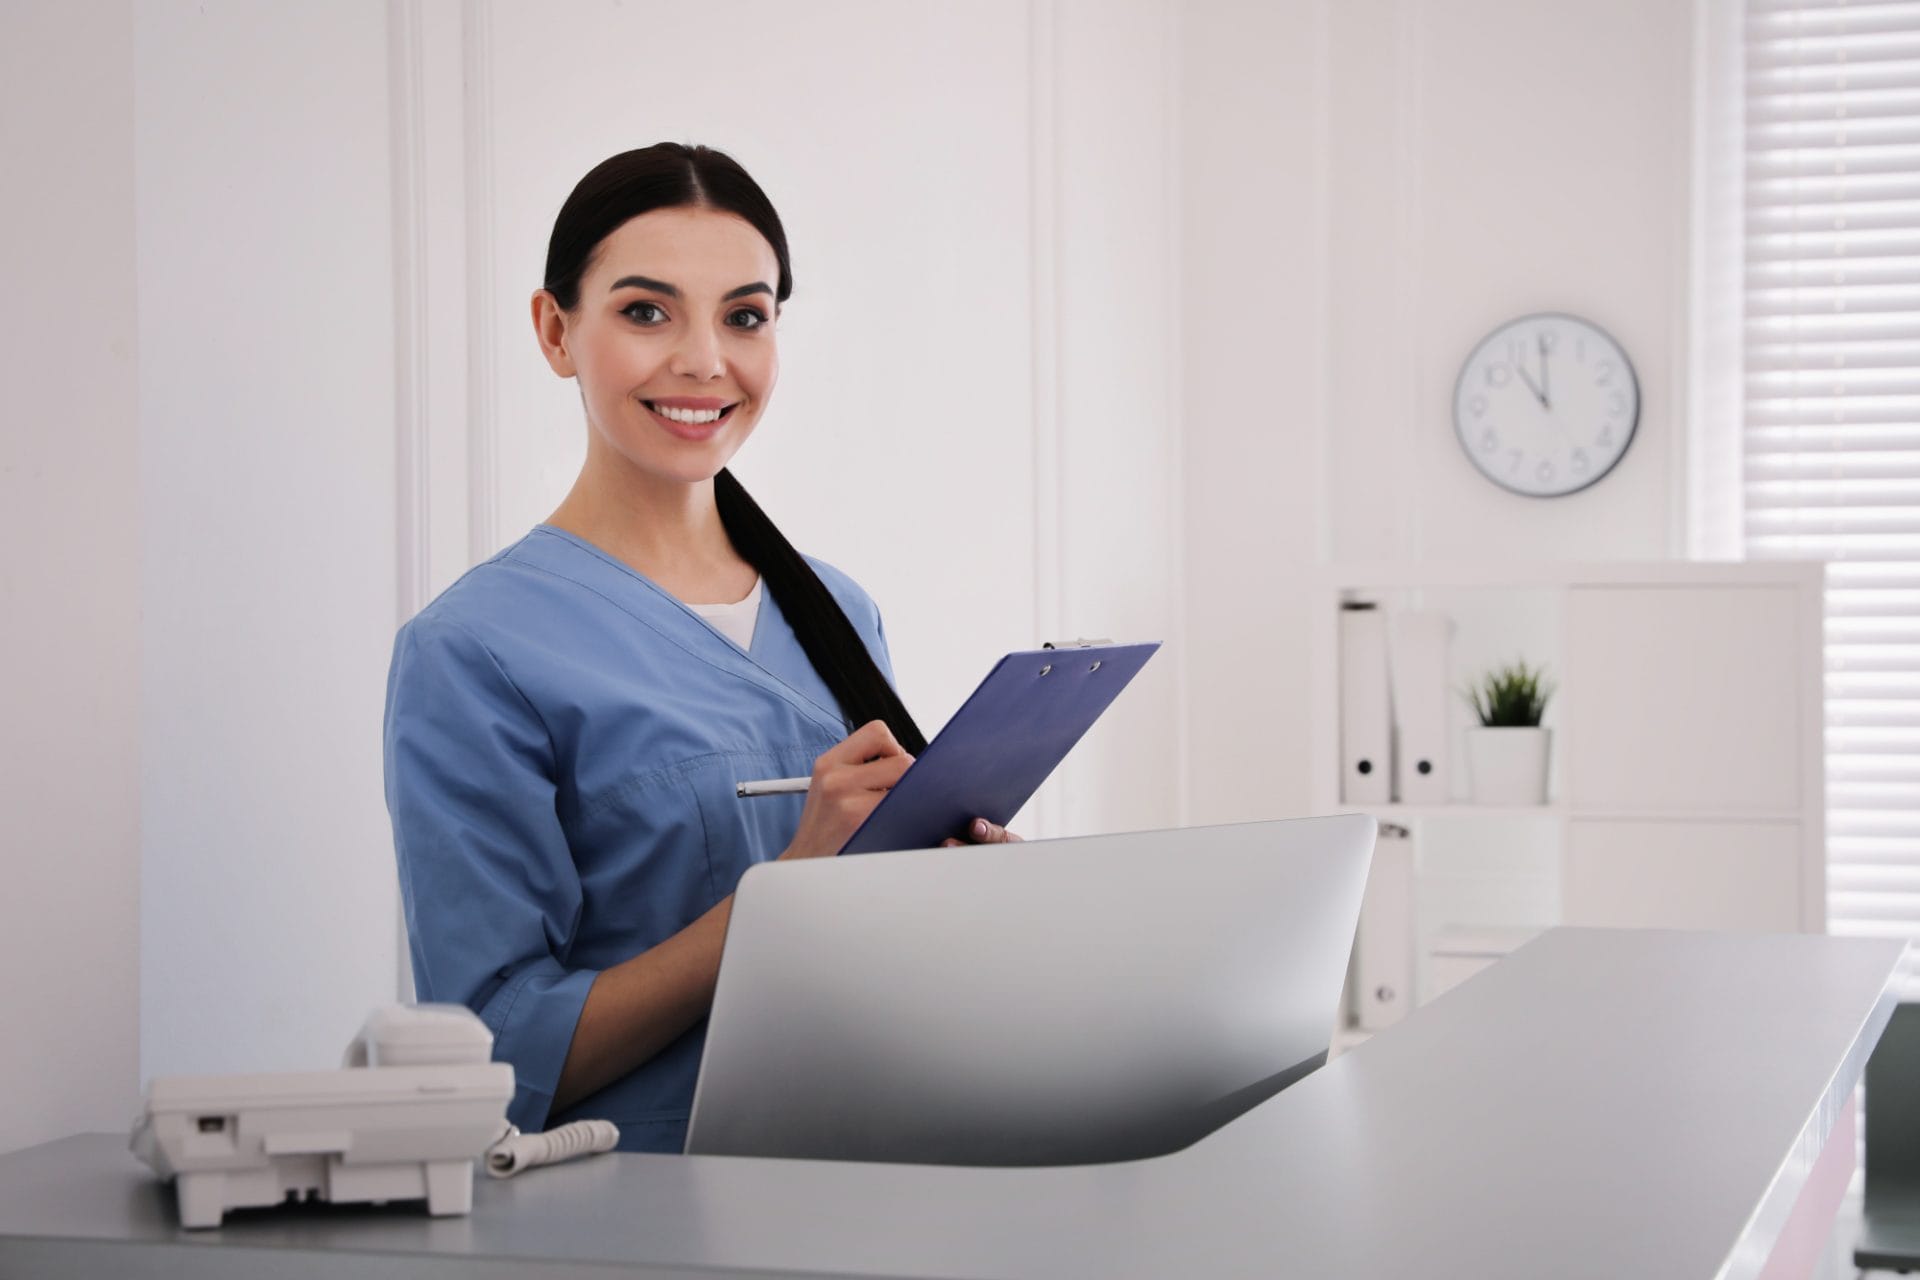 Why Choose Milan Institute for Your Administrative Medical Assistant Training?